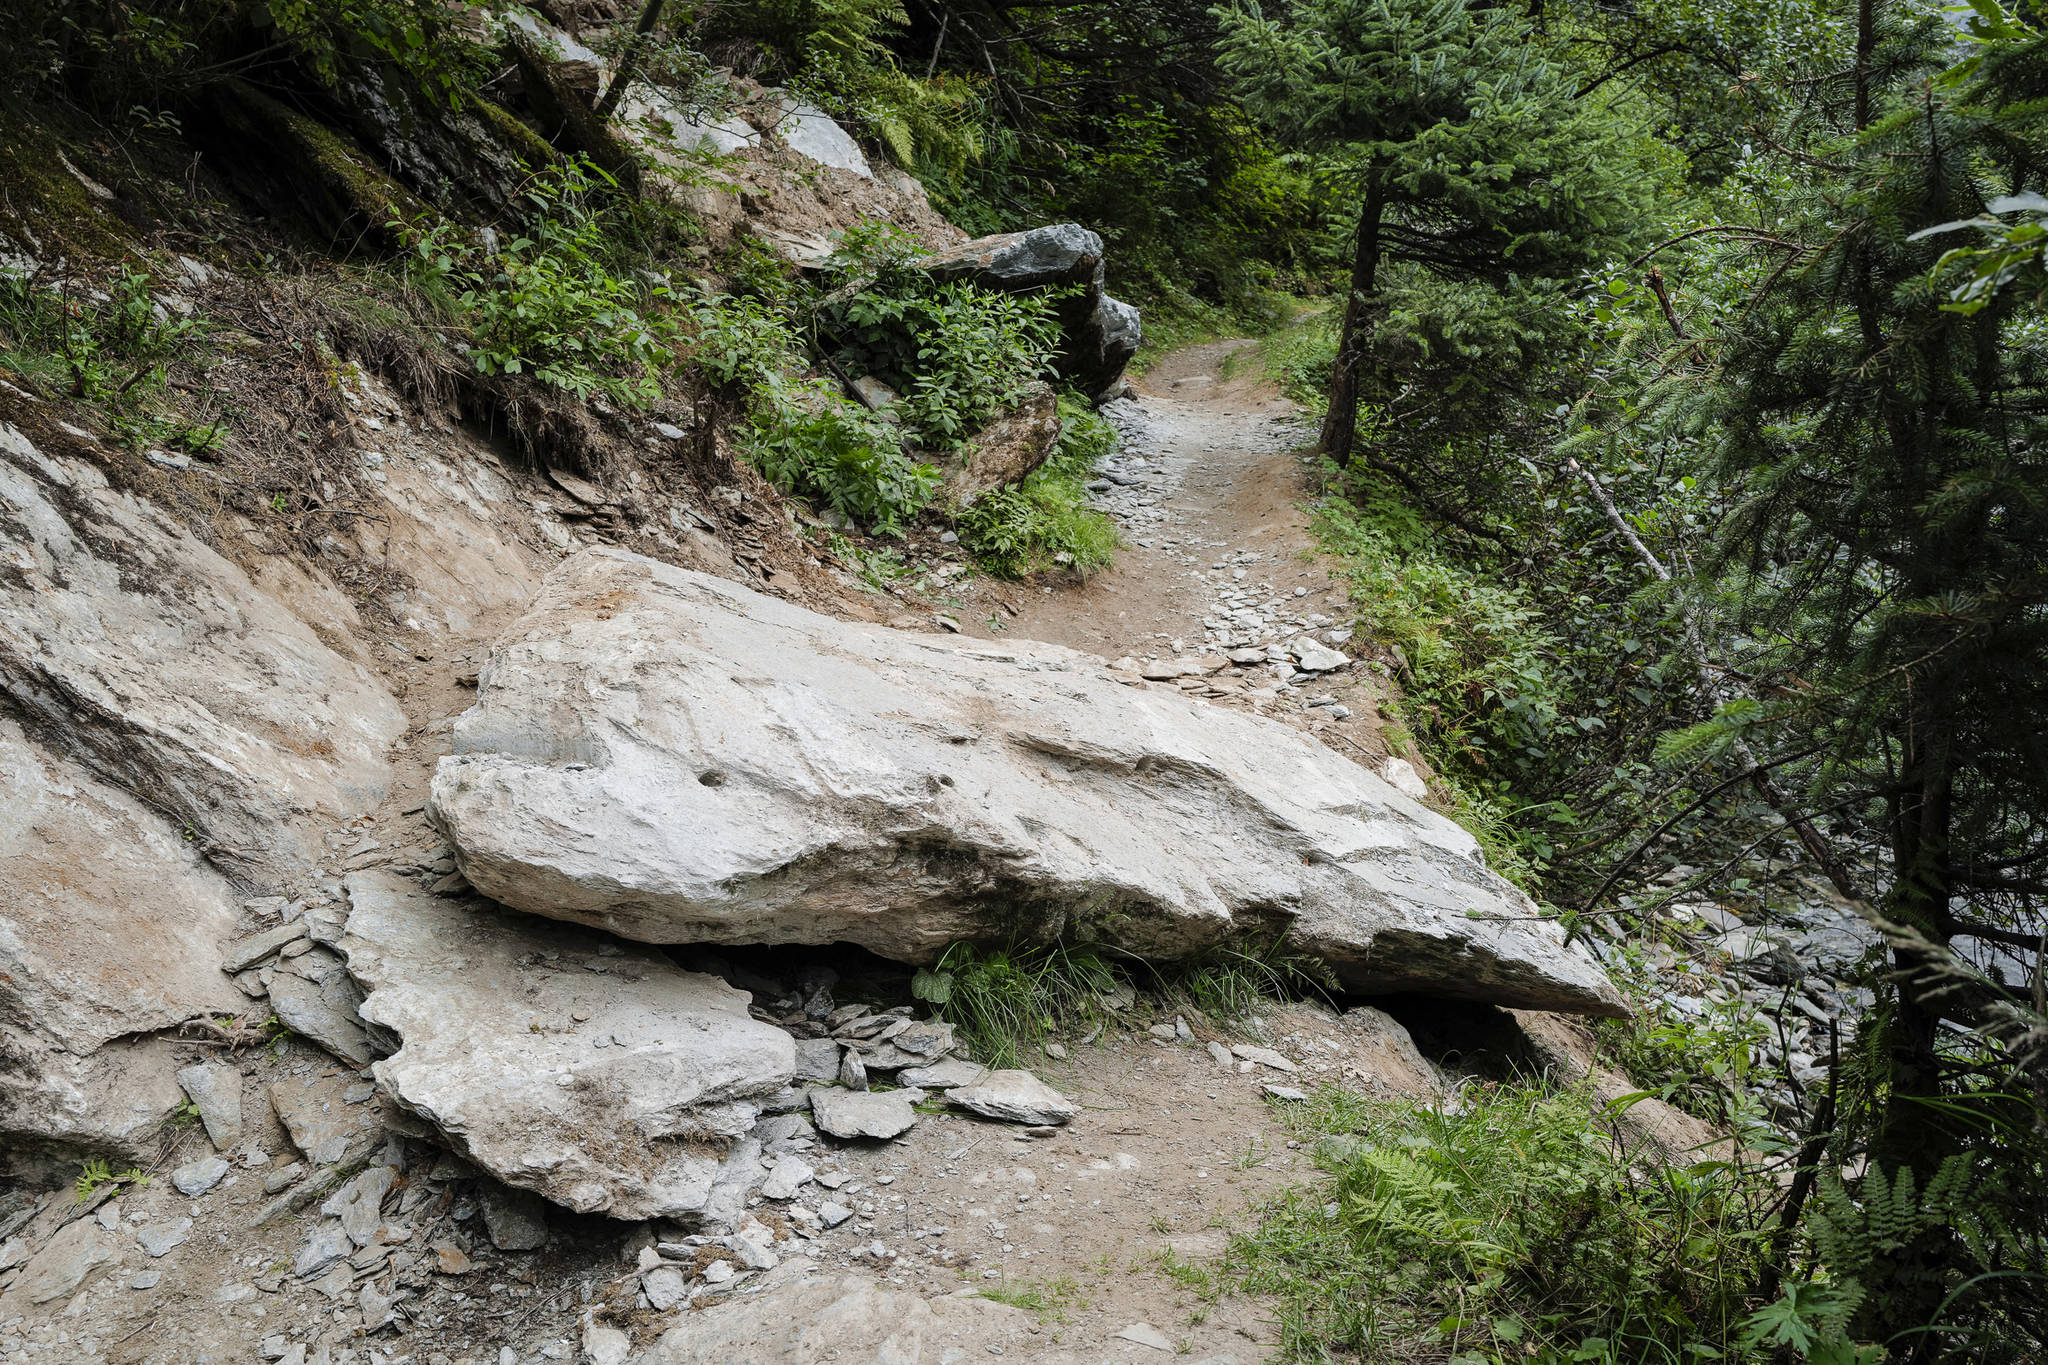 Now you see it, now you don’t: Trail Mix removes 4-ton boulder from trail